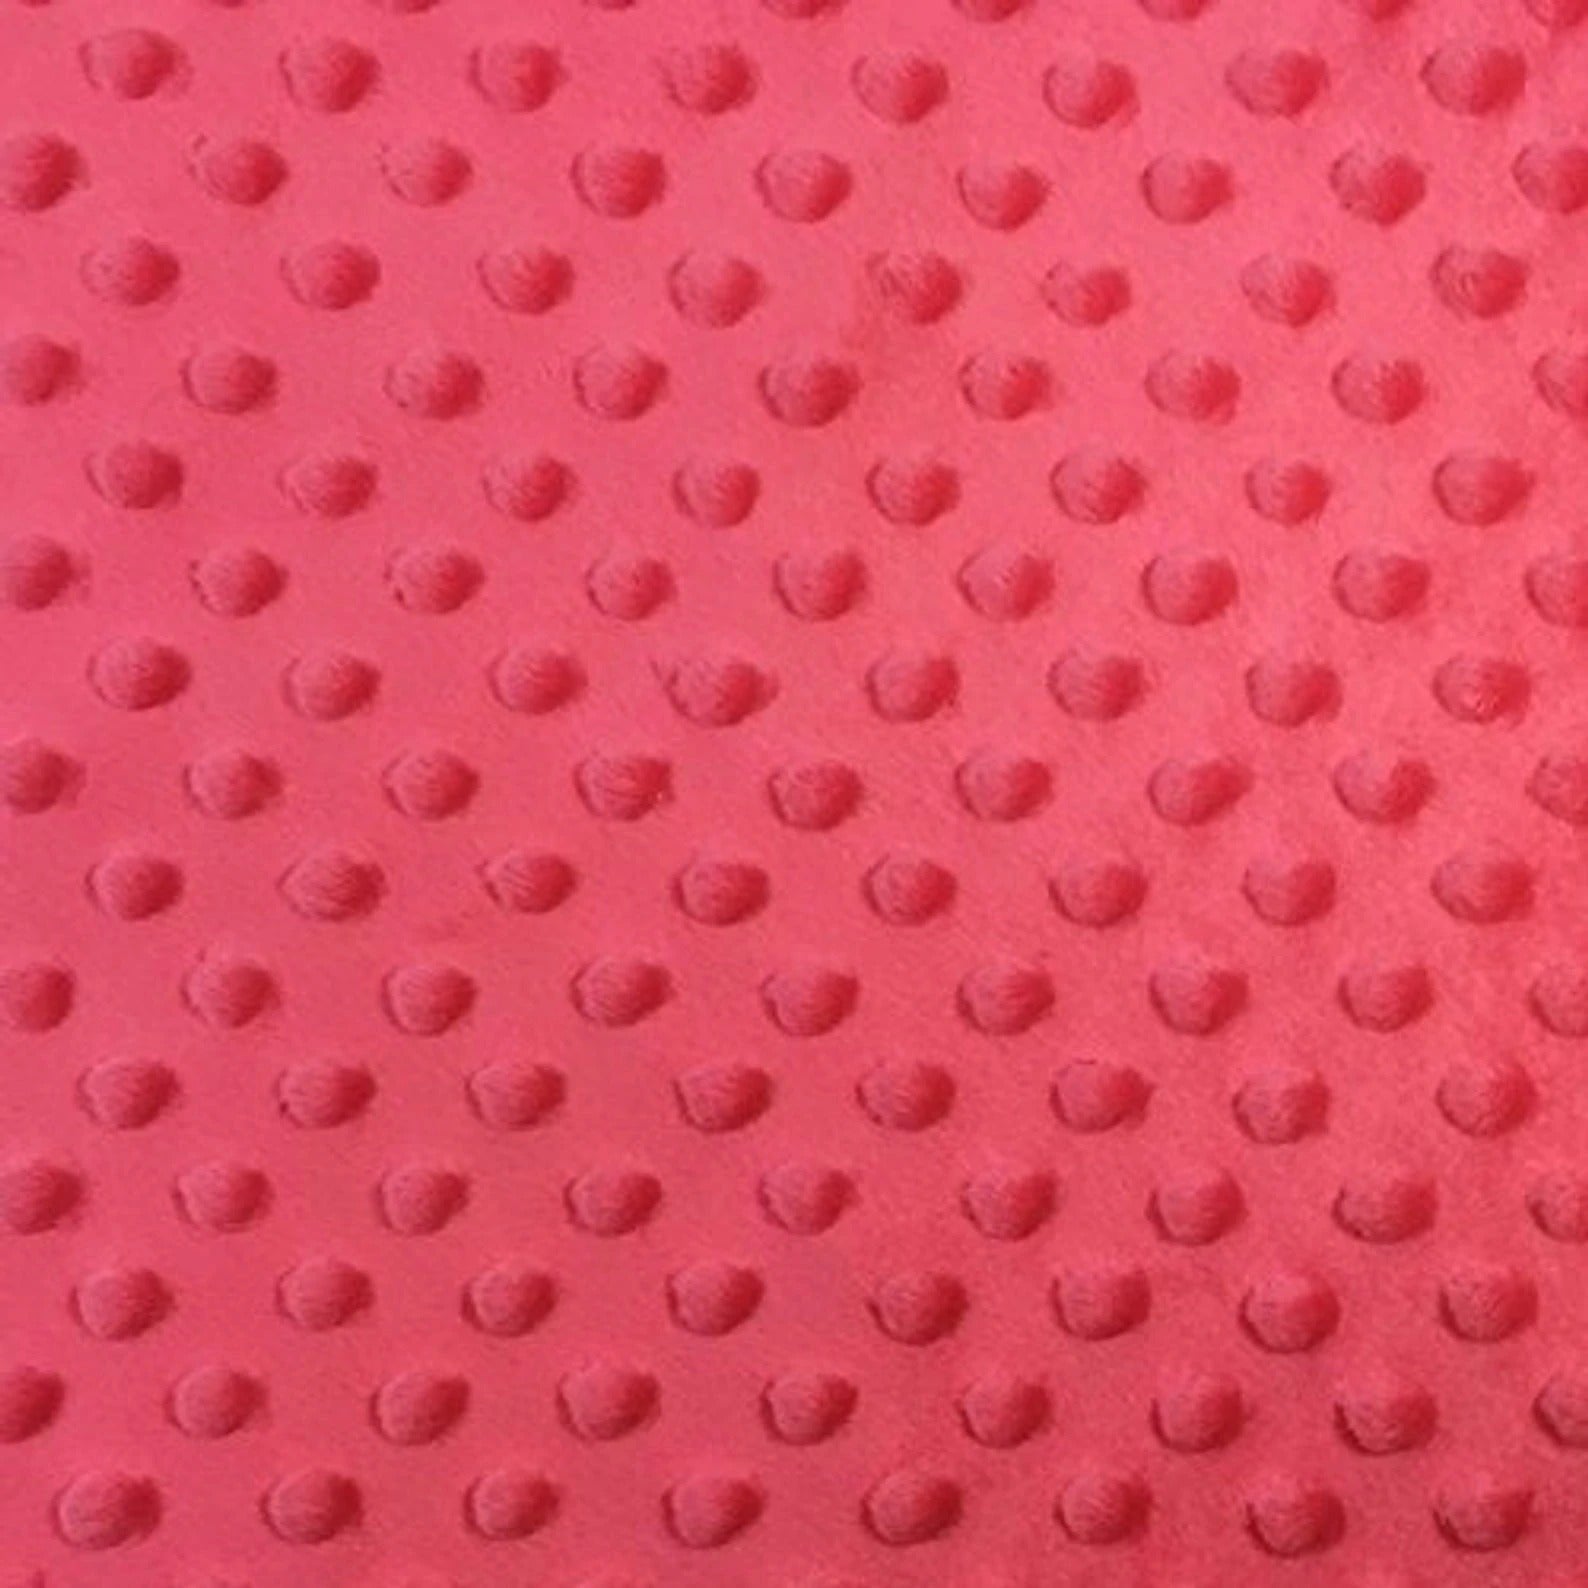 Dimple Dot Minky Fabric Sold By The Yard - 36"/ 58" Strawberry Pink